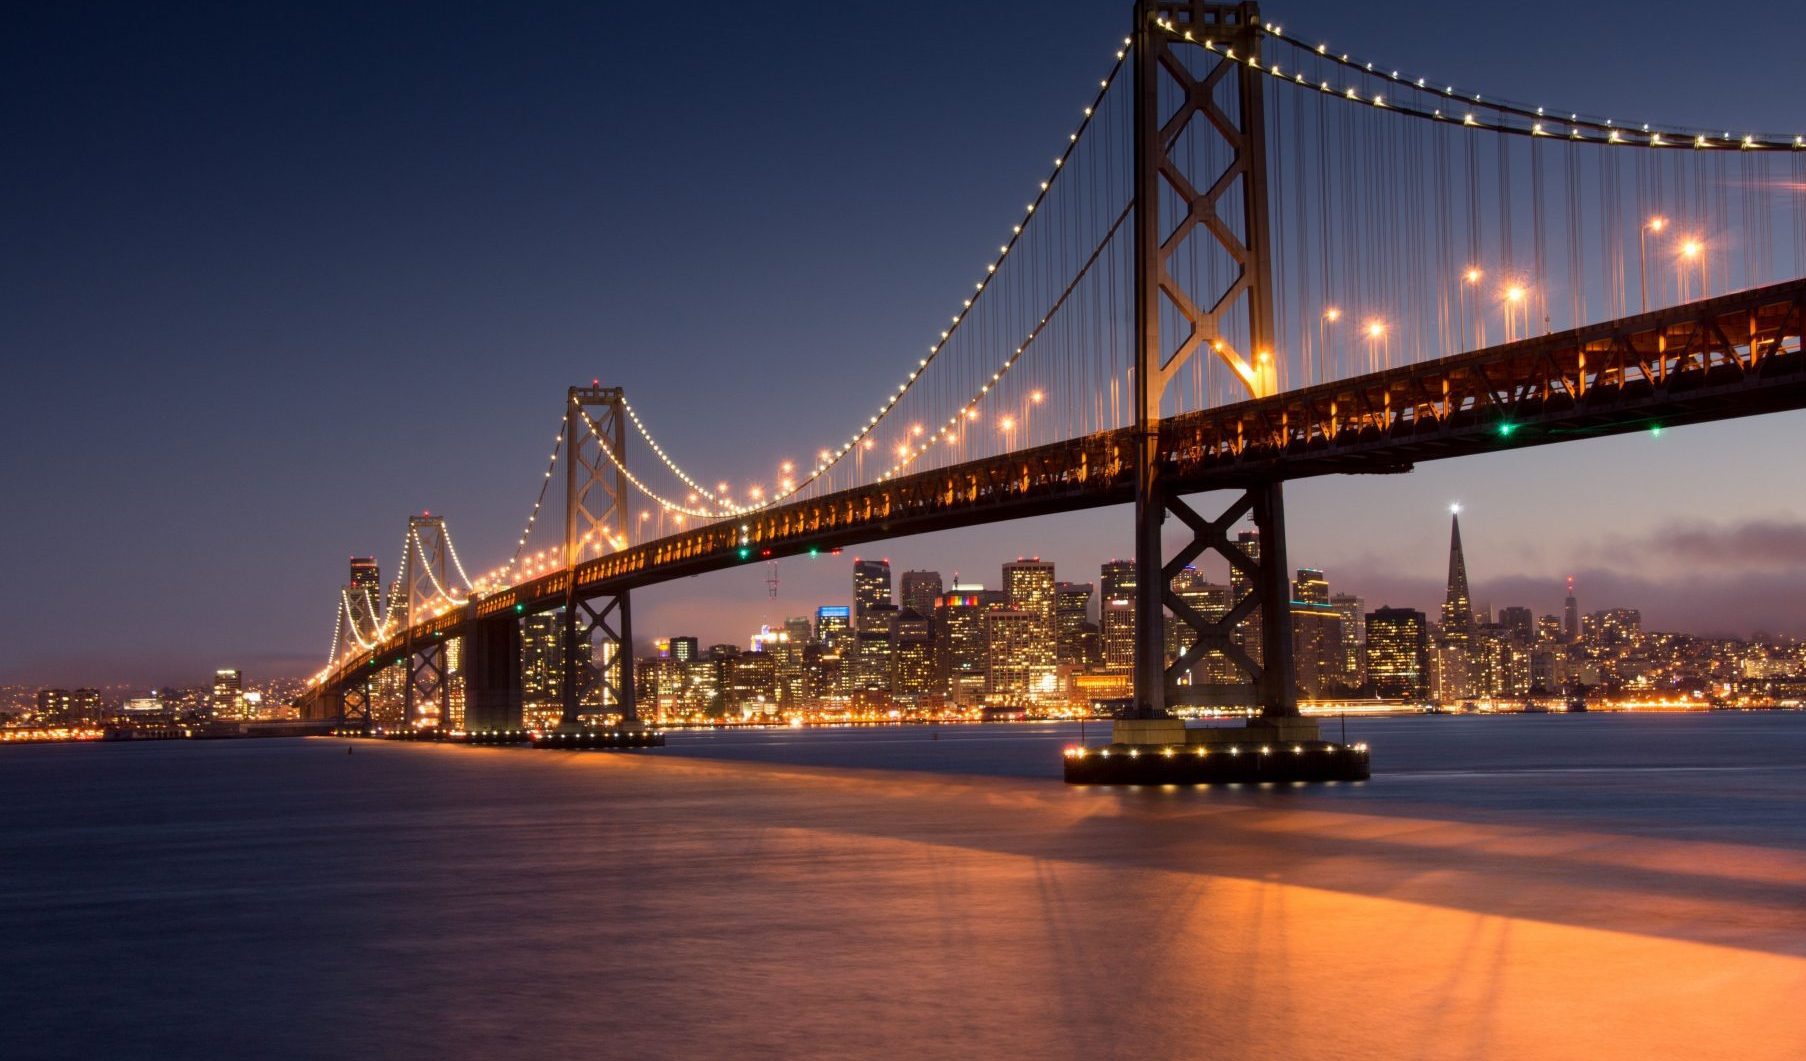 An image of the Golden Gate Bridge at night. If you have been discriminated against, contact the Oakland discrimination lawyers at The Law Office of Jeannette Vaccaro.